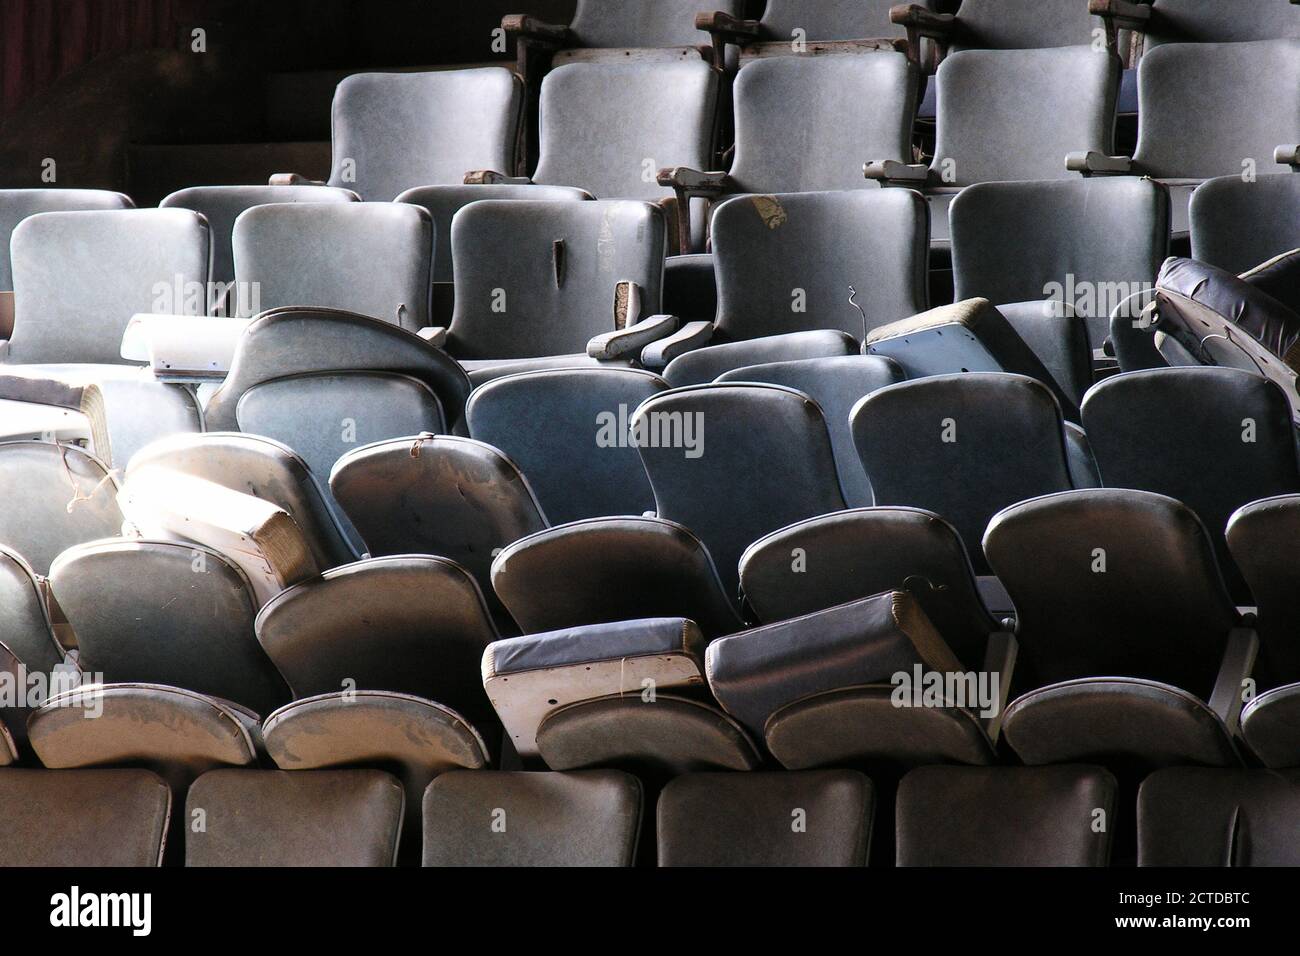 Pile of old worn seats awaiting renovation in historic vintage movie theater building. Stock Photo